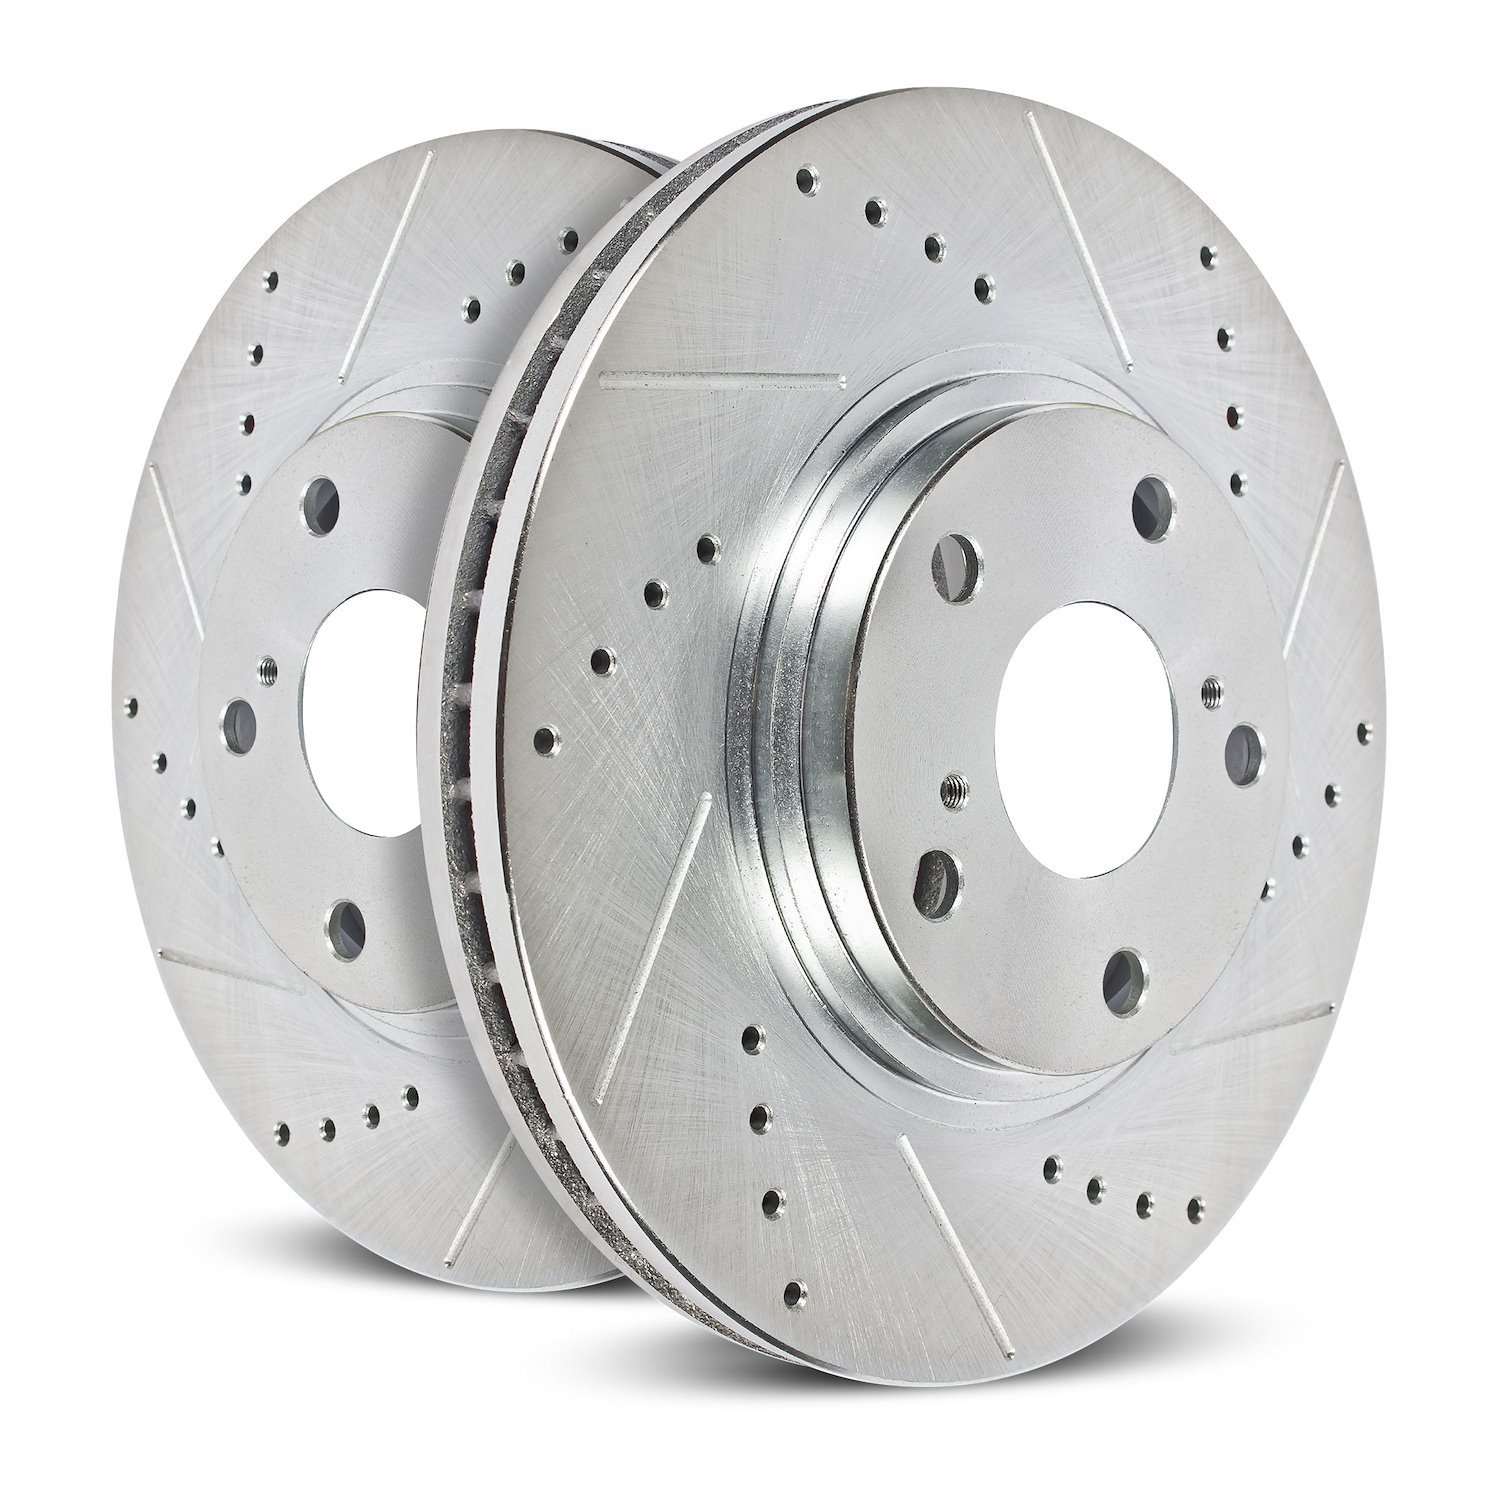 Power Stop drilled and slotted rotors give you the advantages of both drilled holes for cooling and